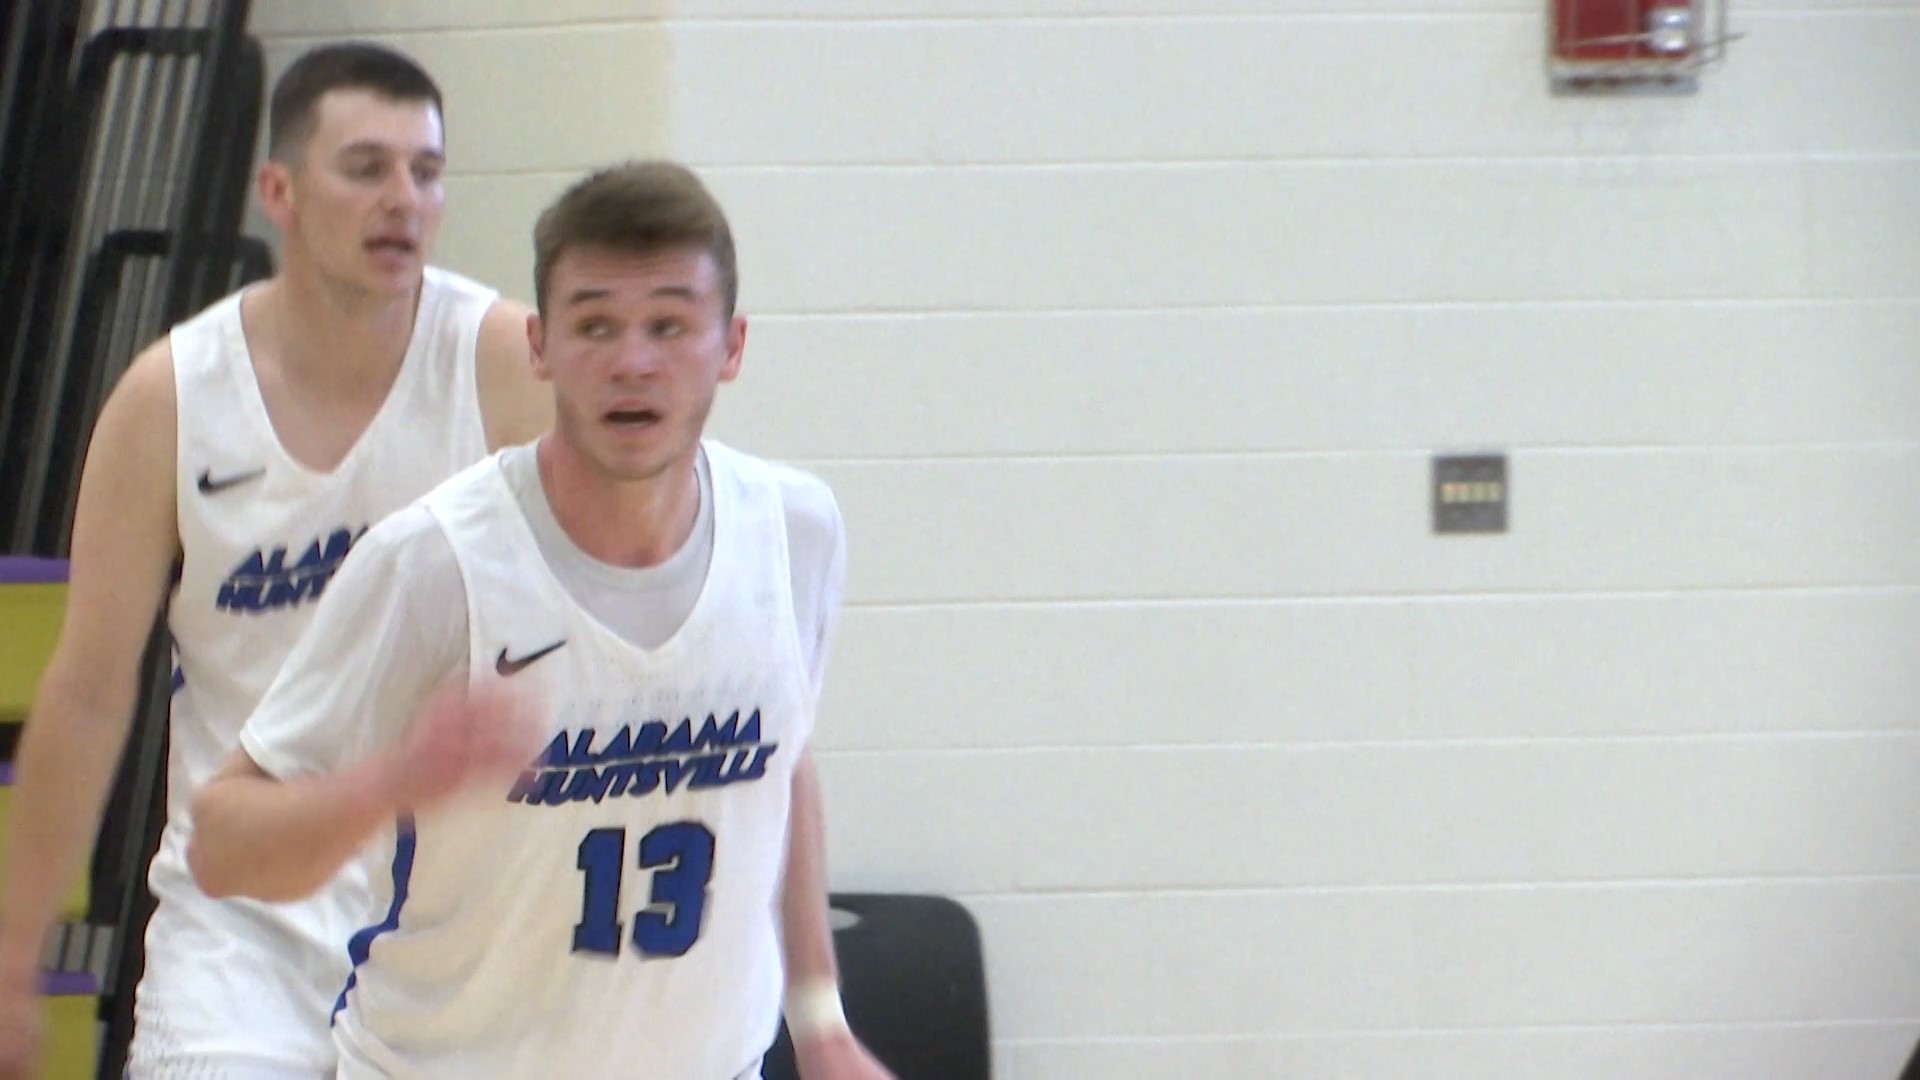 A strong second-half comeback came up just short for the 11th-ranked University of Alabama in Huntsville men's basketball team on Sunday as the Chargers fell 75-70.